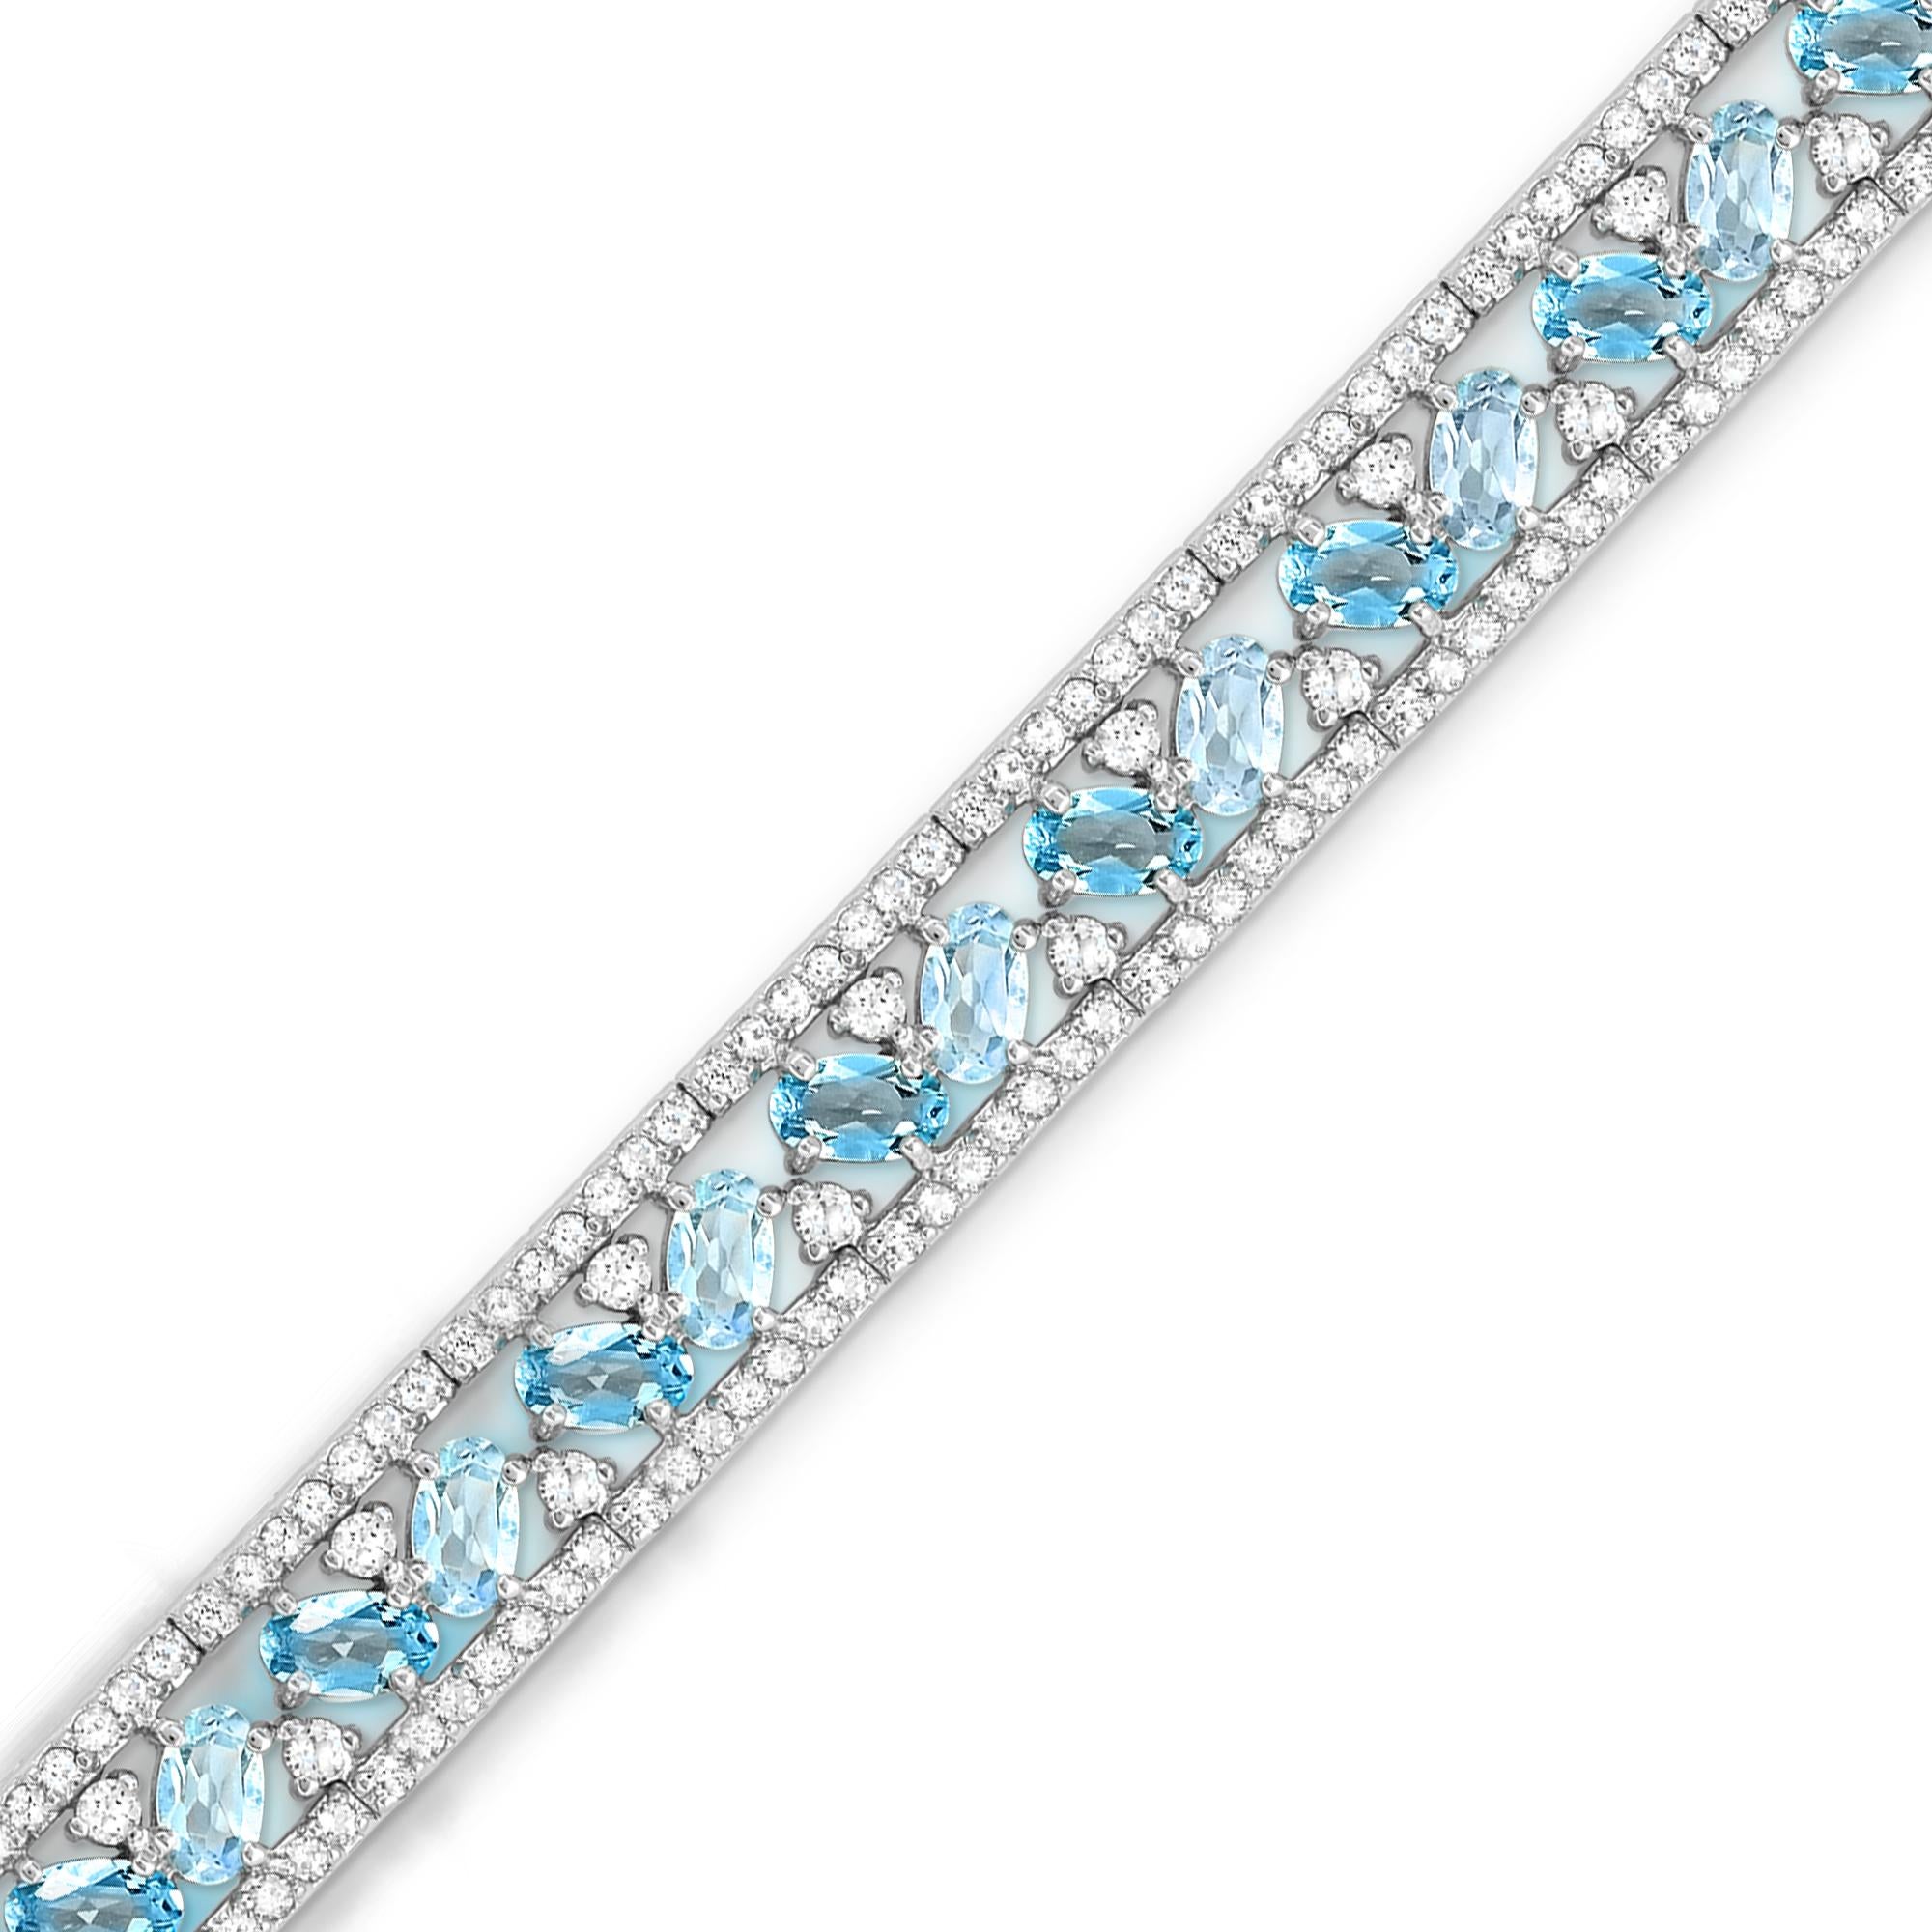 This sparkly modern designed bracelet features oval Swiss blue and sky blue topaz accented by round white topaz gemstones secured with a custom-designed open-box closure. 

Metal: Sterling Silver
Gemstones:
Oval Swiss Blue Topaz/Sky Blue Topaz: 5.0